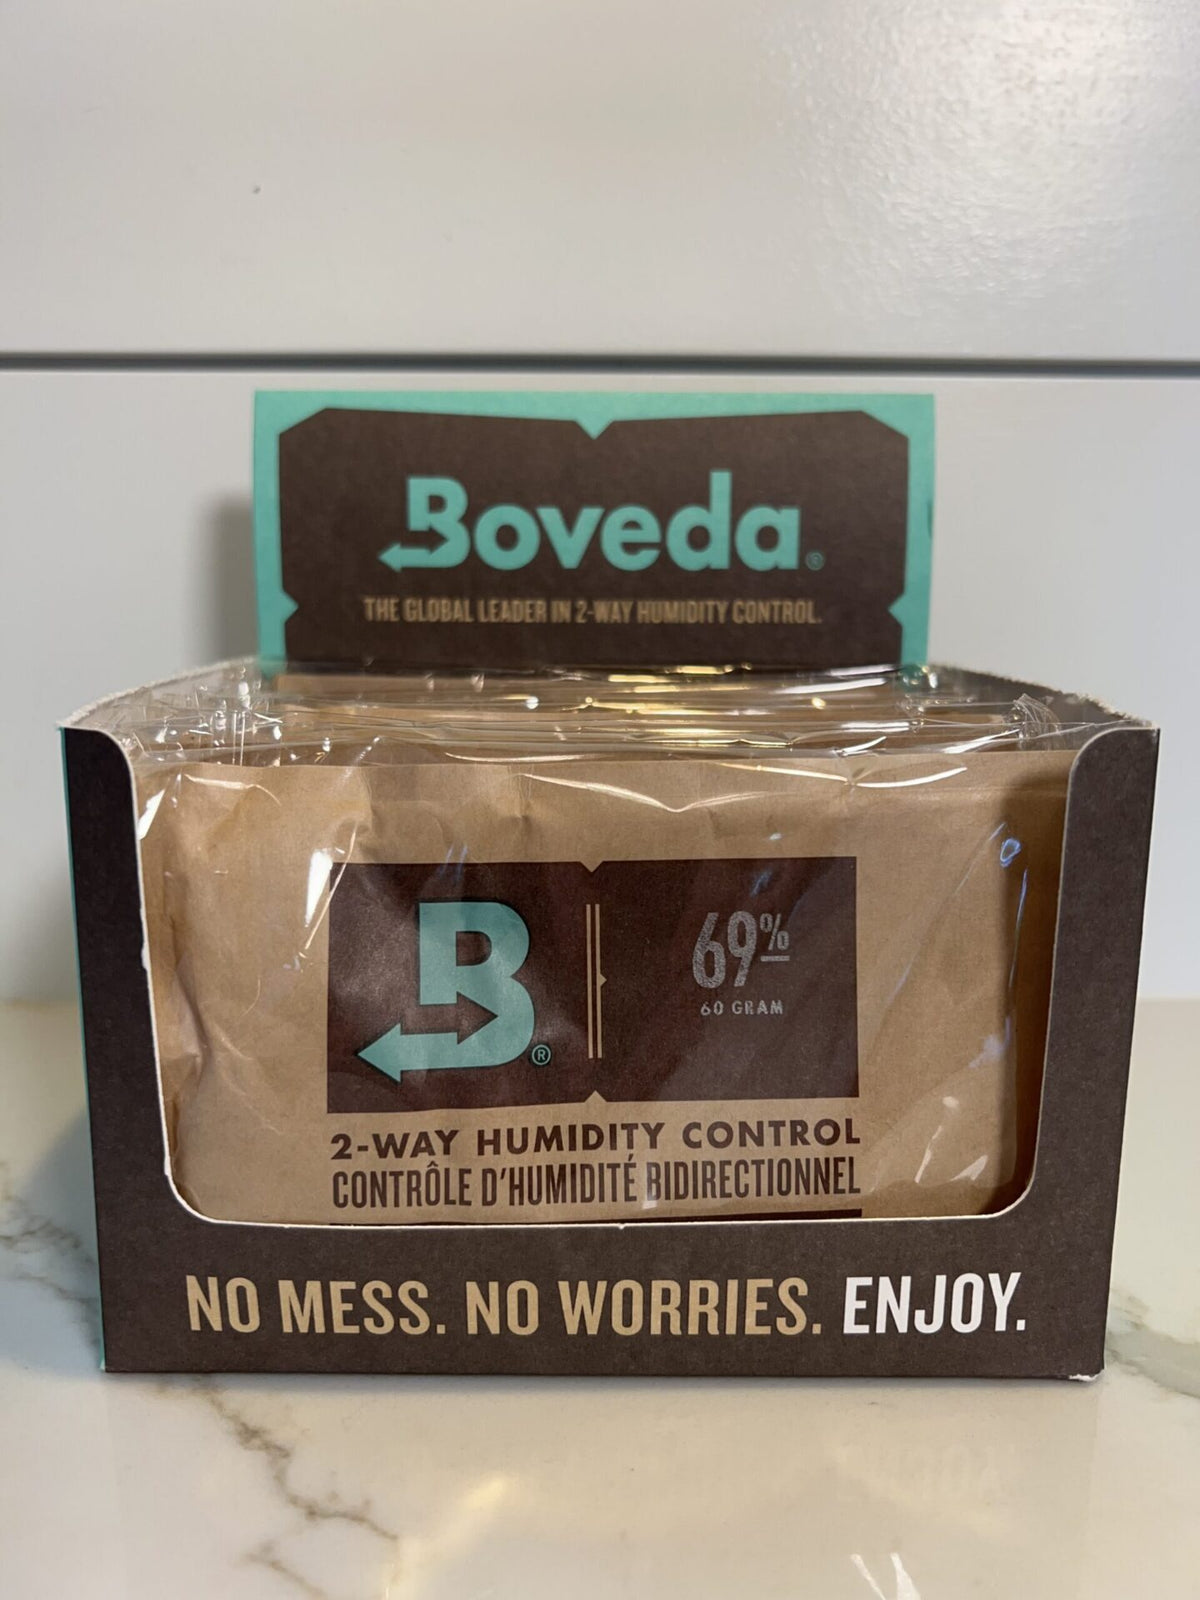 Boveda 60g 69% cigars supplied by Sir Louis Cigars